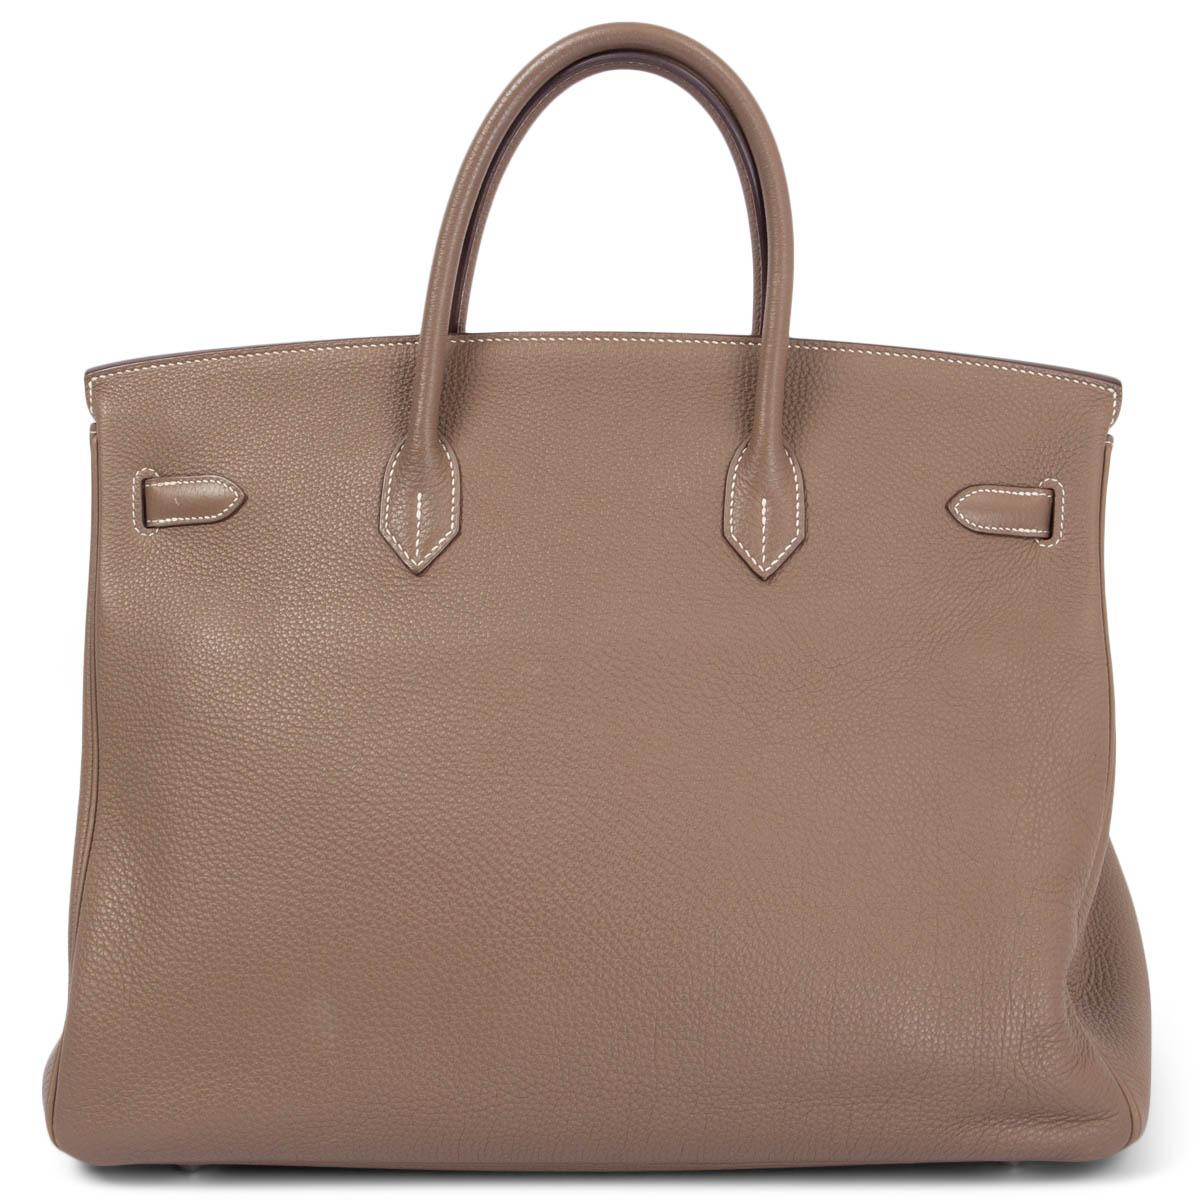 Brown HERMES Etoupe taupe Togo leather BIRKIN 40 Bag Phw For Sale